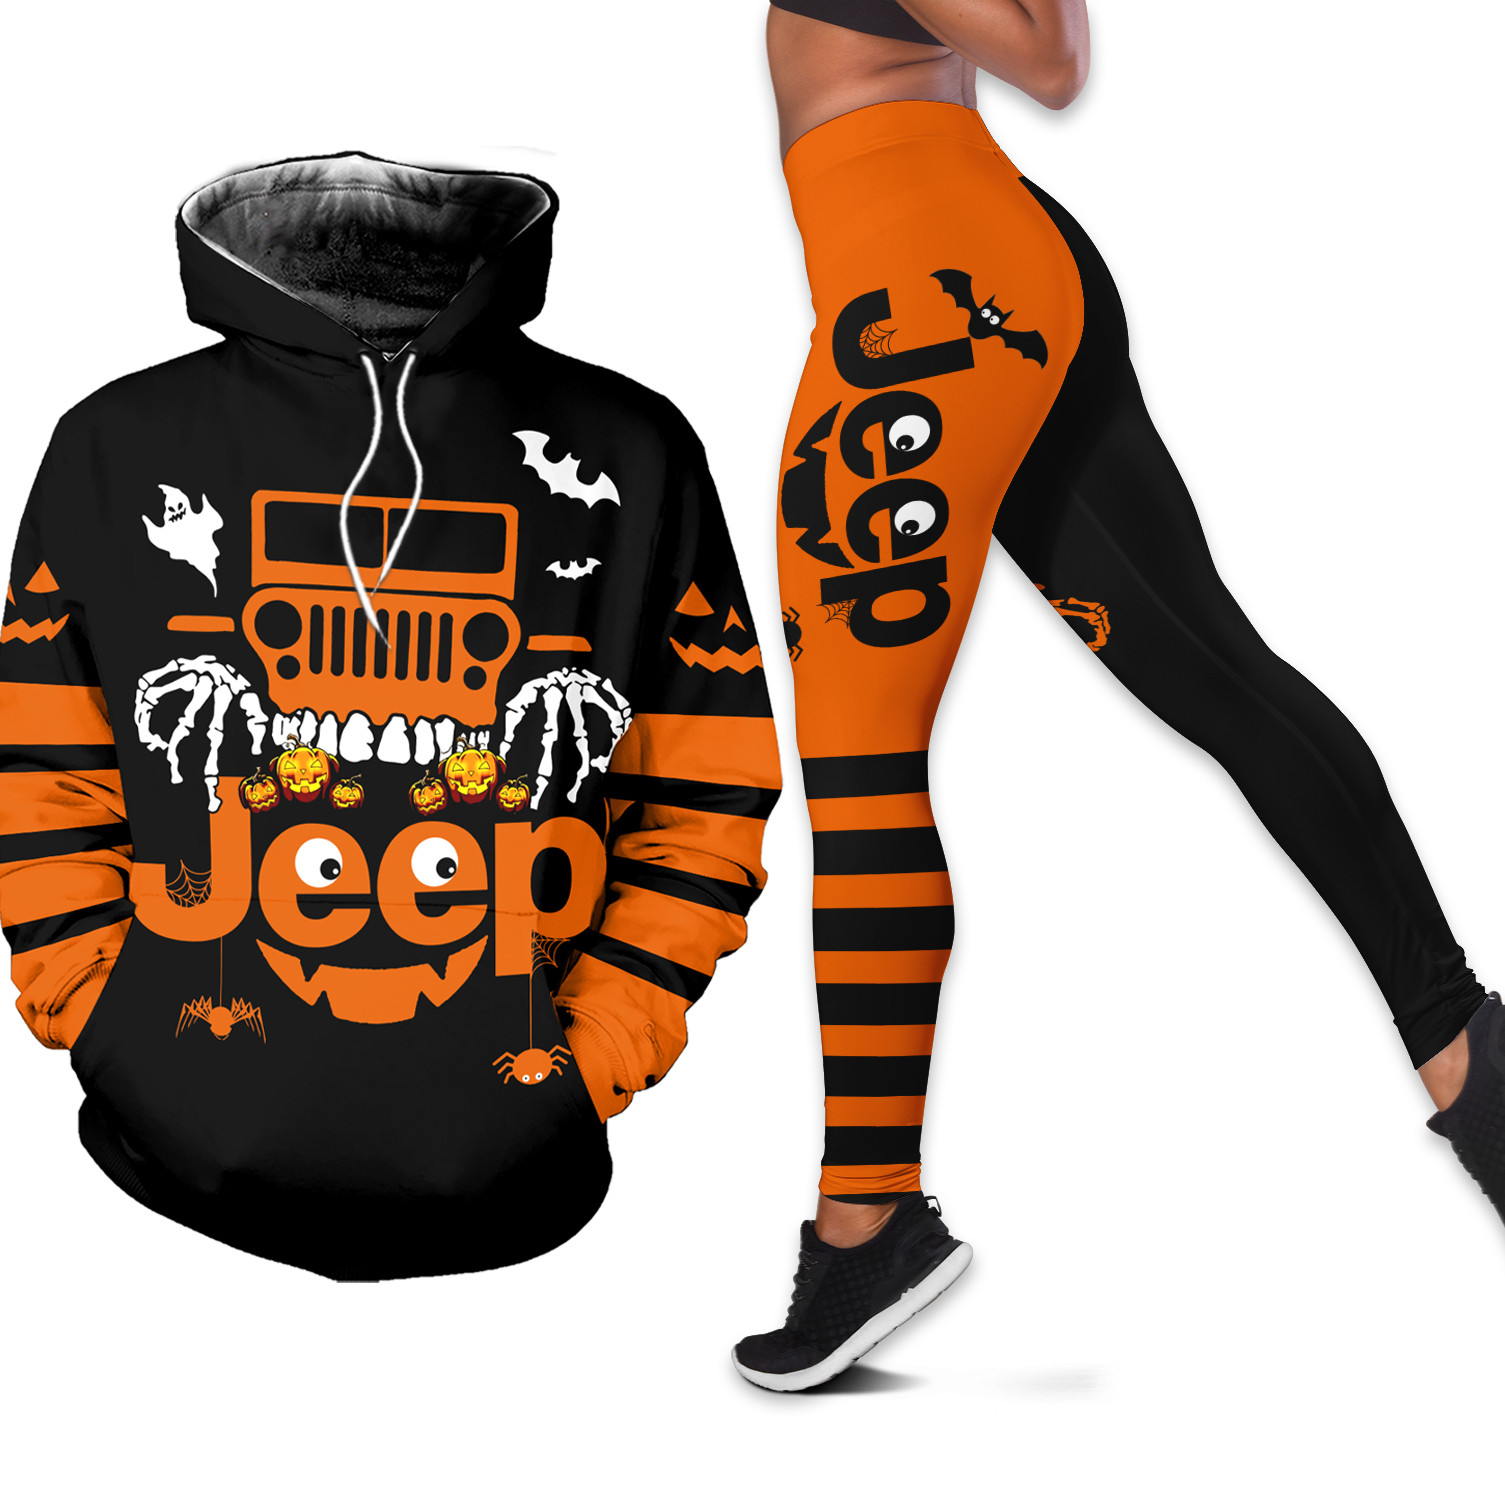 Jeep Girl Tank Top And Legging Halloween Gift For Women PAN3DSET0180